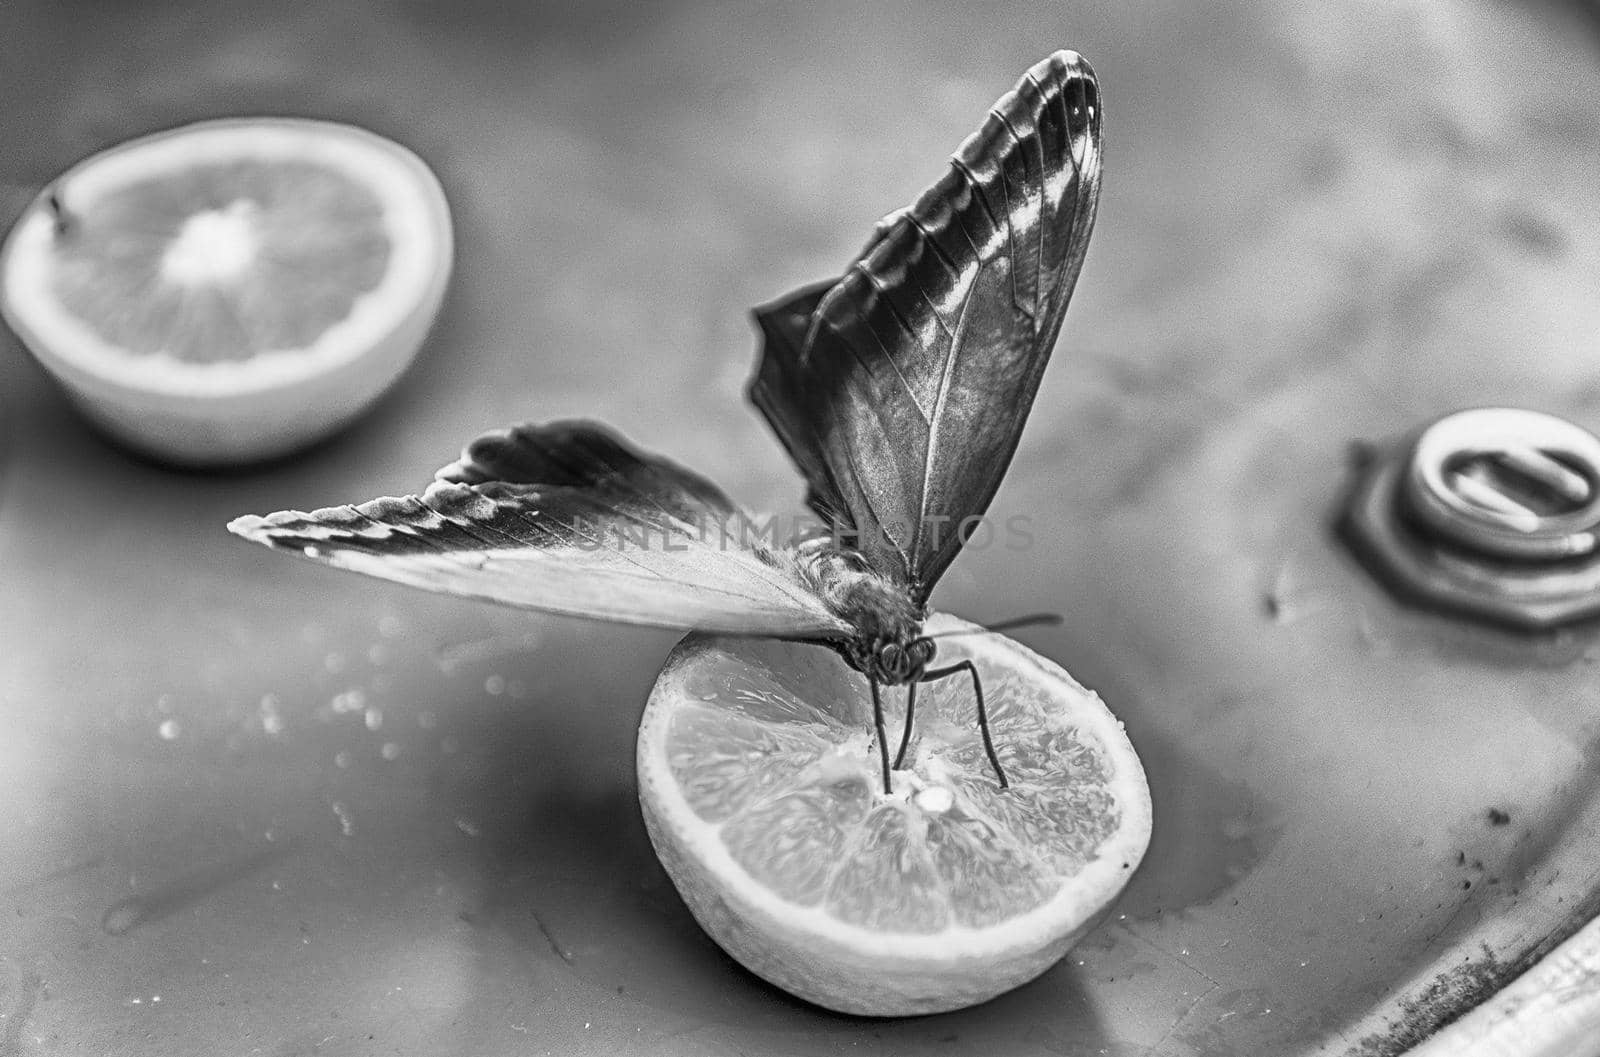 Eryphanis automedon, aka Automedon giant owl is a tropical butterfly. Here shown while eating from an orange